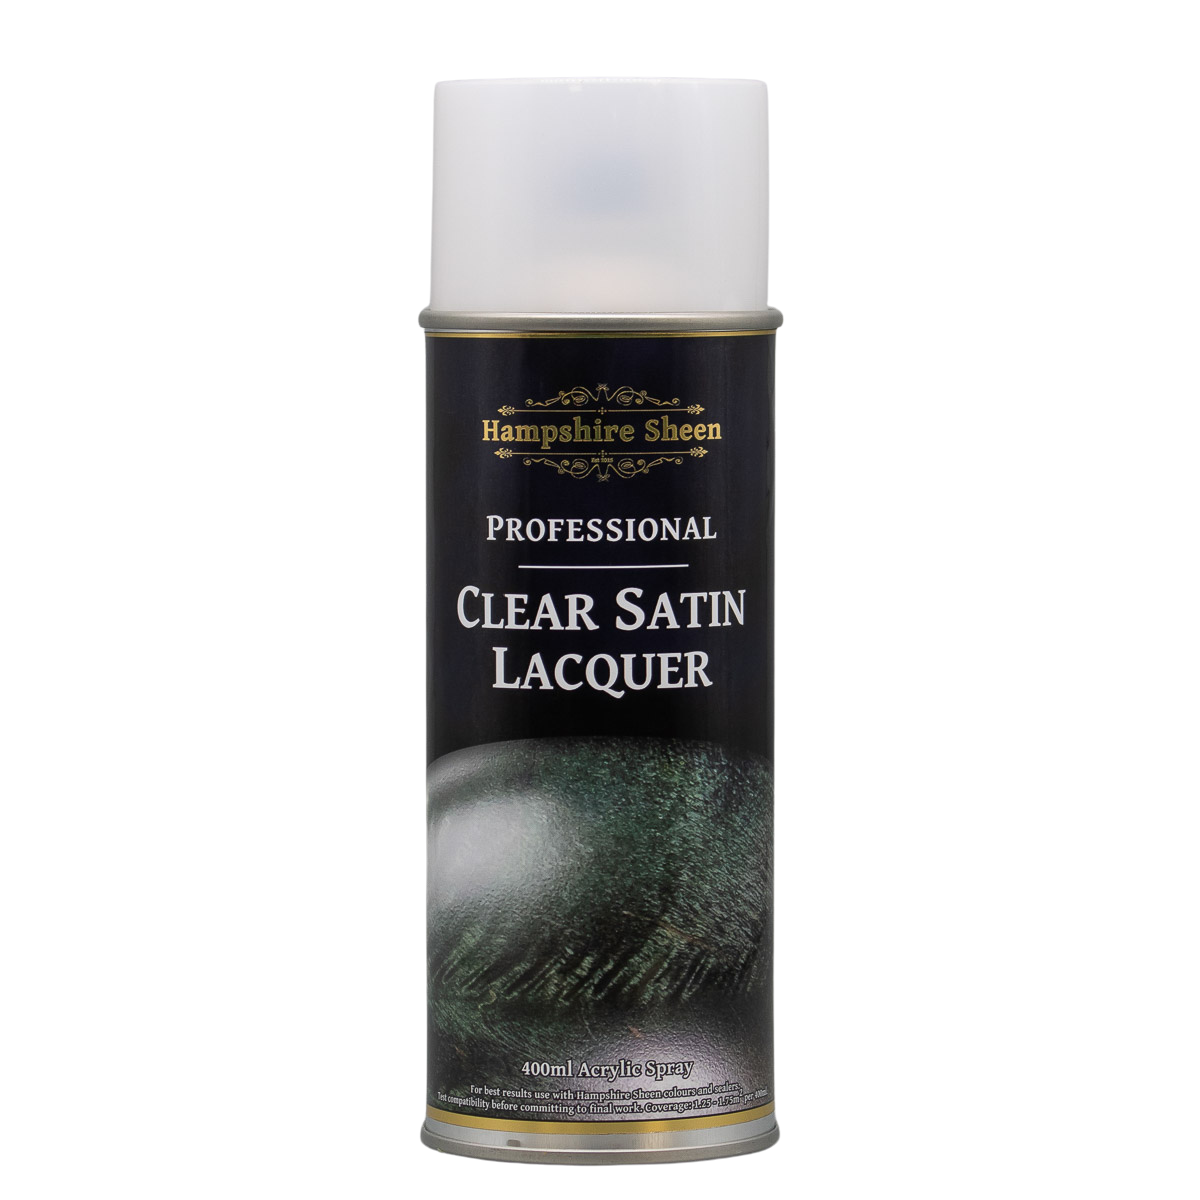 Pro Clear Satin Lacquer Spray - Hampshire Sheen